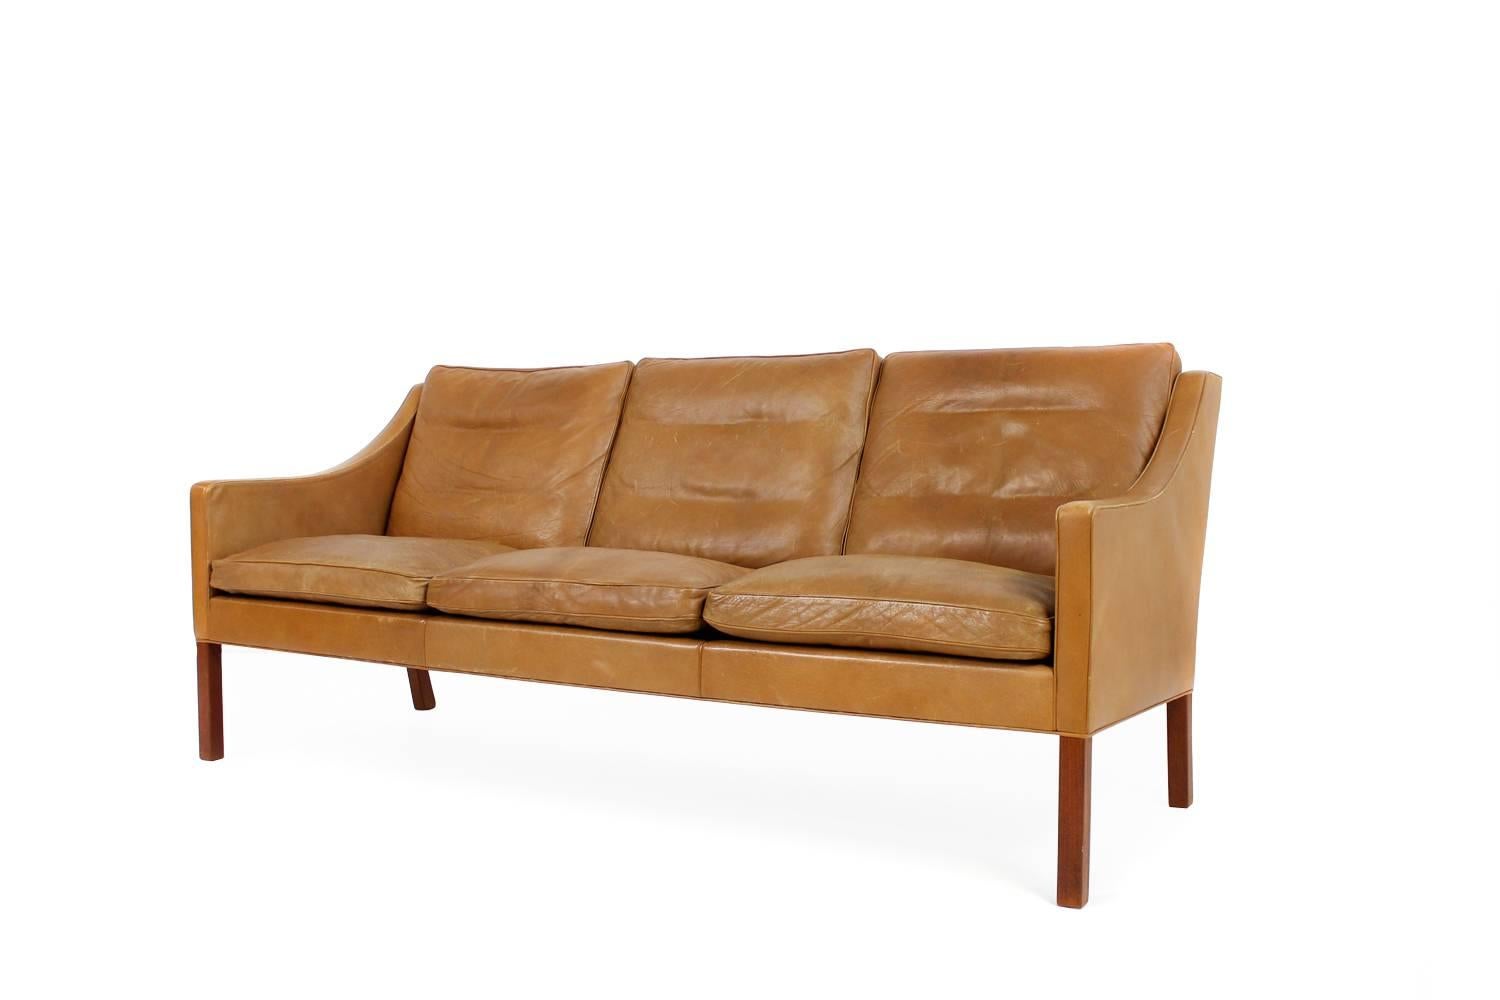 Borge Mogensen Sofa Mod. 2209 made by Fredericia Denmark.
It was bought in 1971 has the original leather with only minor wear consistent with age, down filling. Overall a beautiful vintage condition, Teak base. Danish modern design. Fredericia